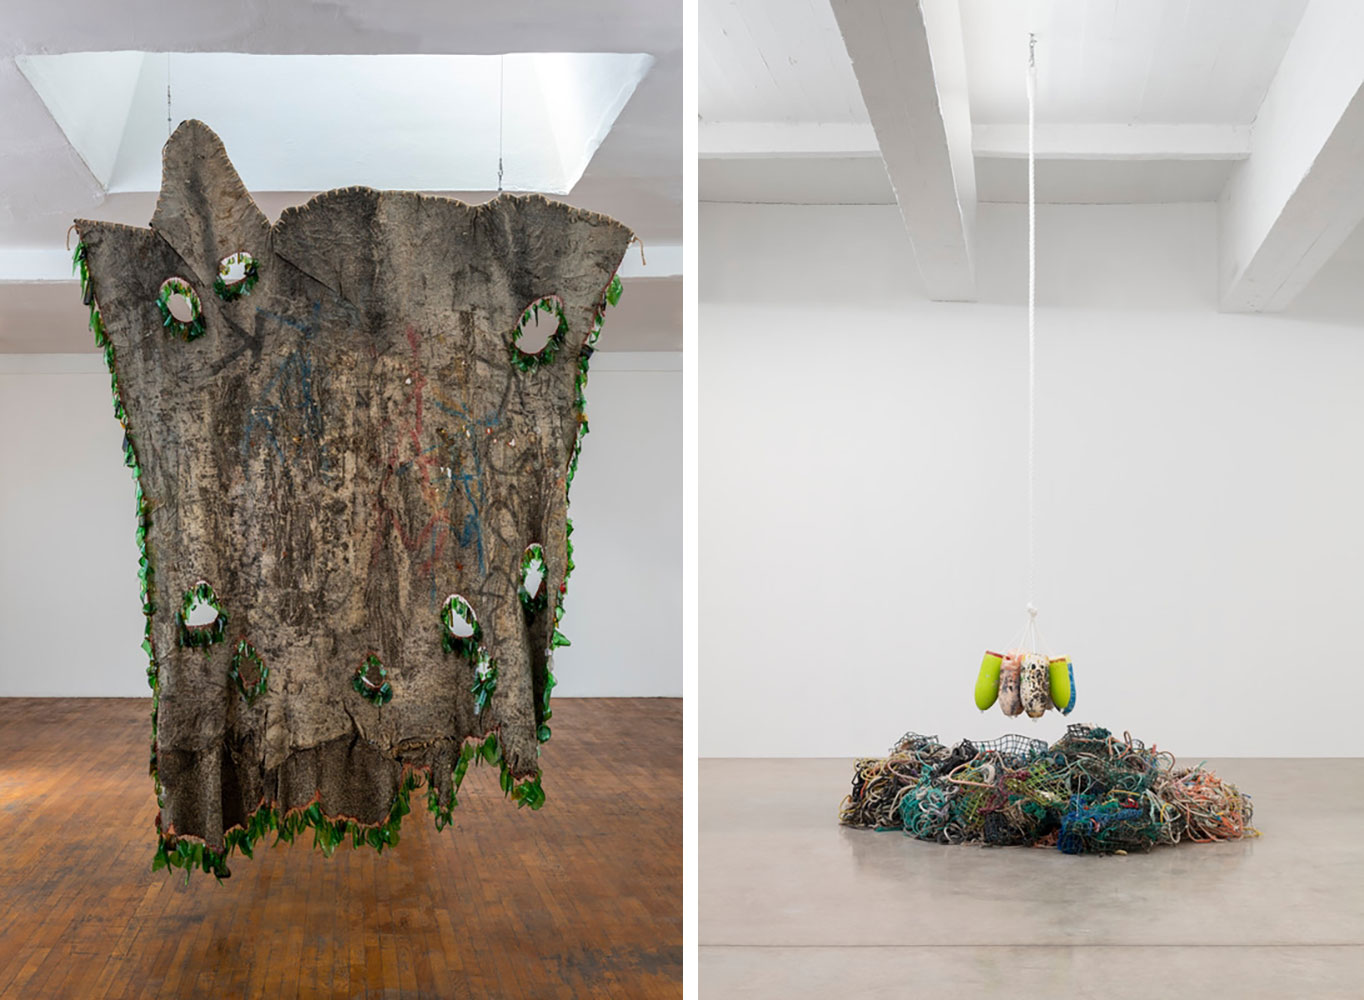 Left: Installation view of Whitney Biennial 2024: Even Better than the Real Thing (Whitney Museum of American Art, New York, March 20–August 11, 2024Right: Karyn Olivier, How Many Ways Can You Disappear, 2021. Potwarp; lobster traps; buoys washed ashore on Matinicus Island, Maine; and rope reproduced in salt, 179 × 98 × 73 in. (454.7 × 248.9 × 185.4 cm). © Karyn Olivier. Courtesy the artist and Tanya Bonakdar Gallery, New York and Los Angeles. Photograph by Pierre Le Hors 